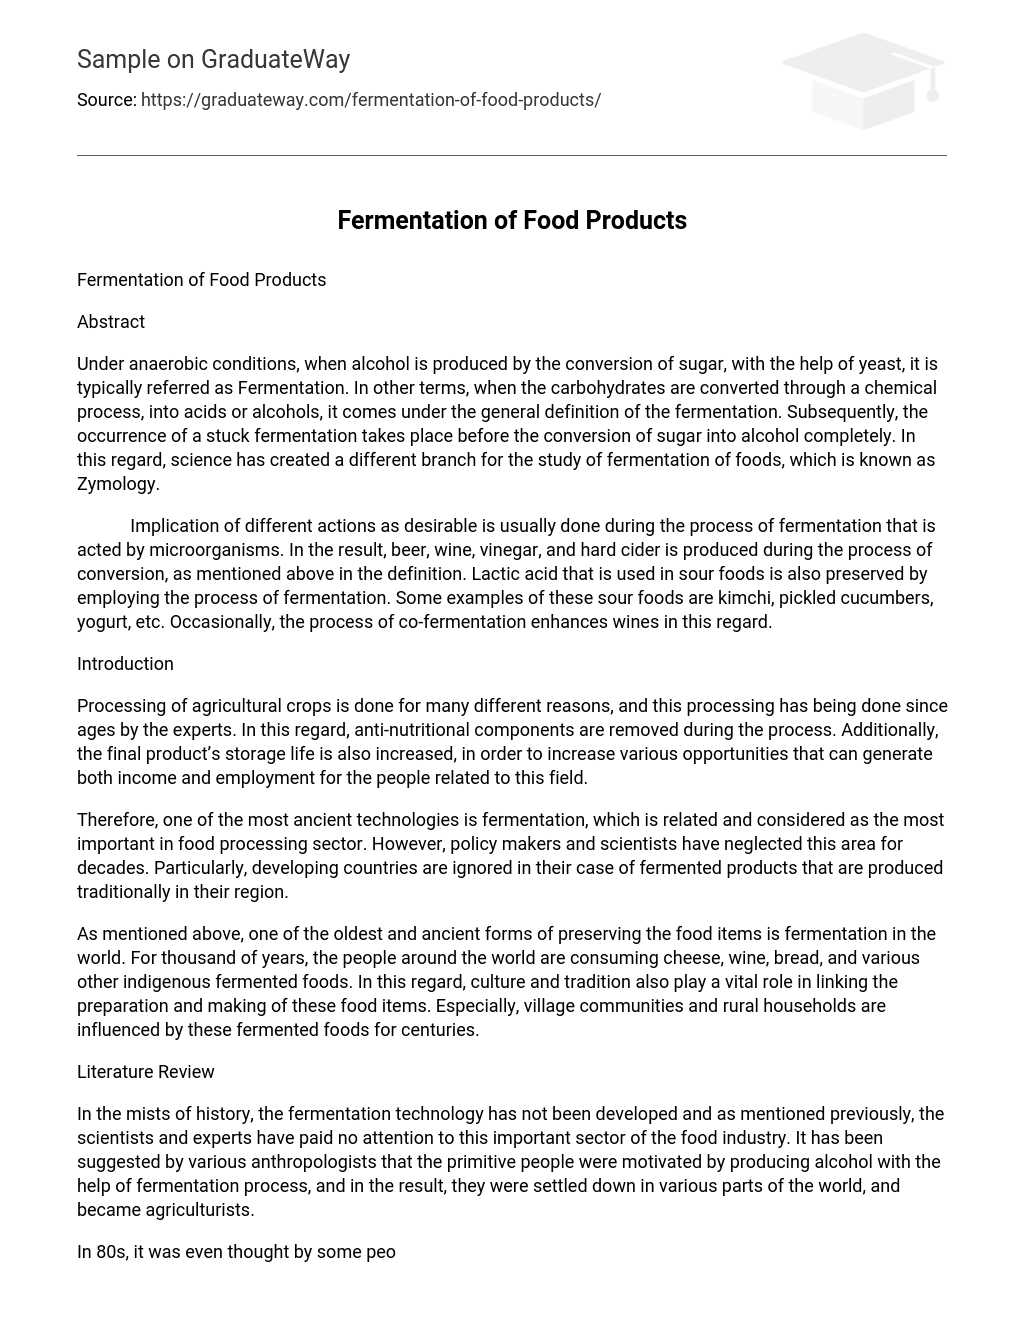 Fermentation of Food Products